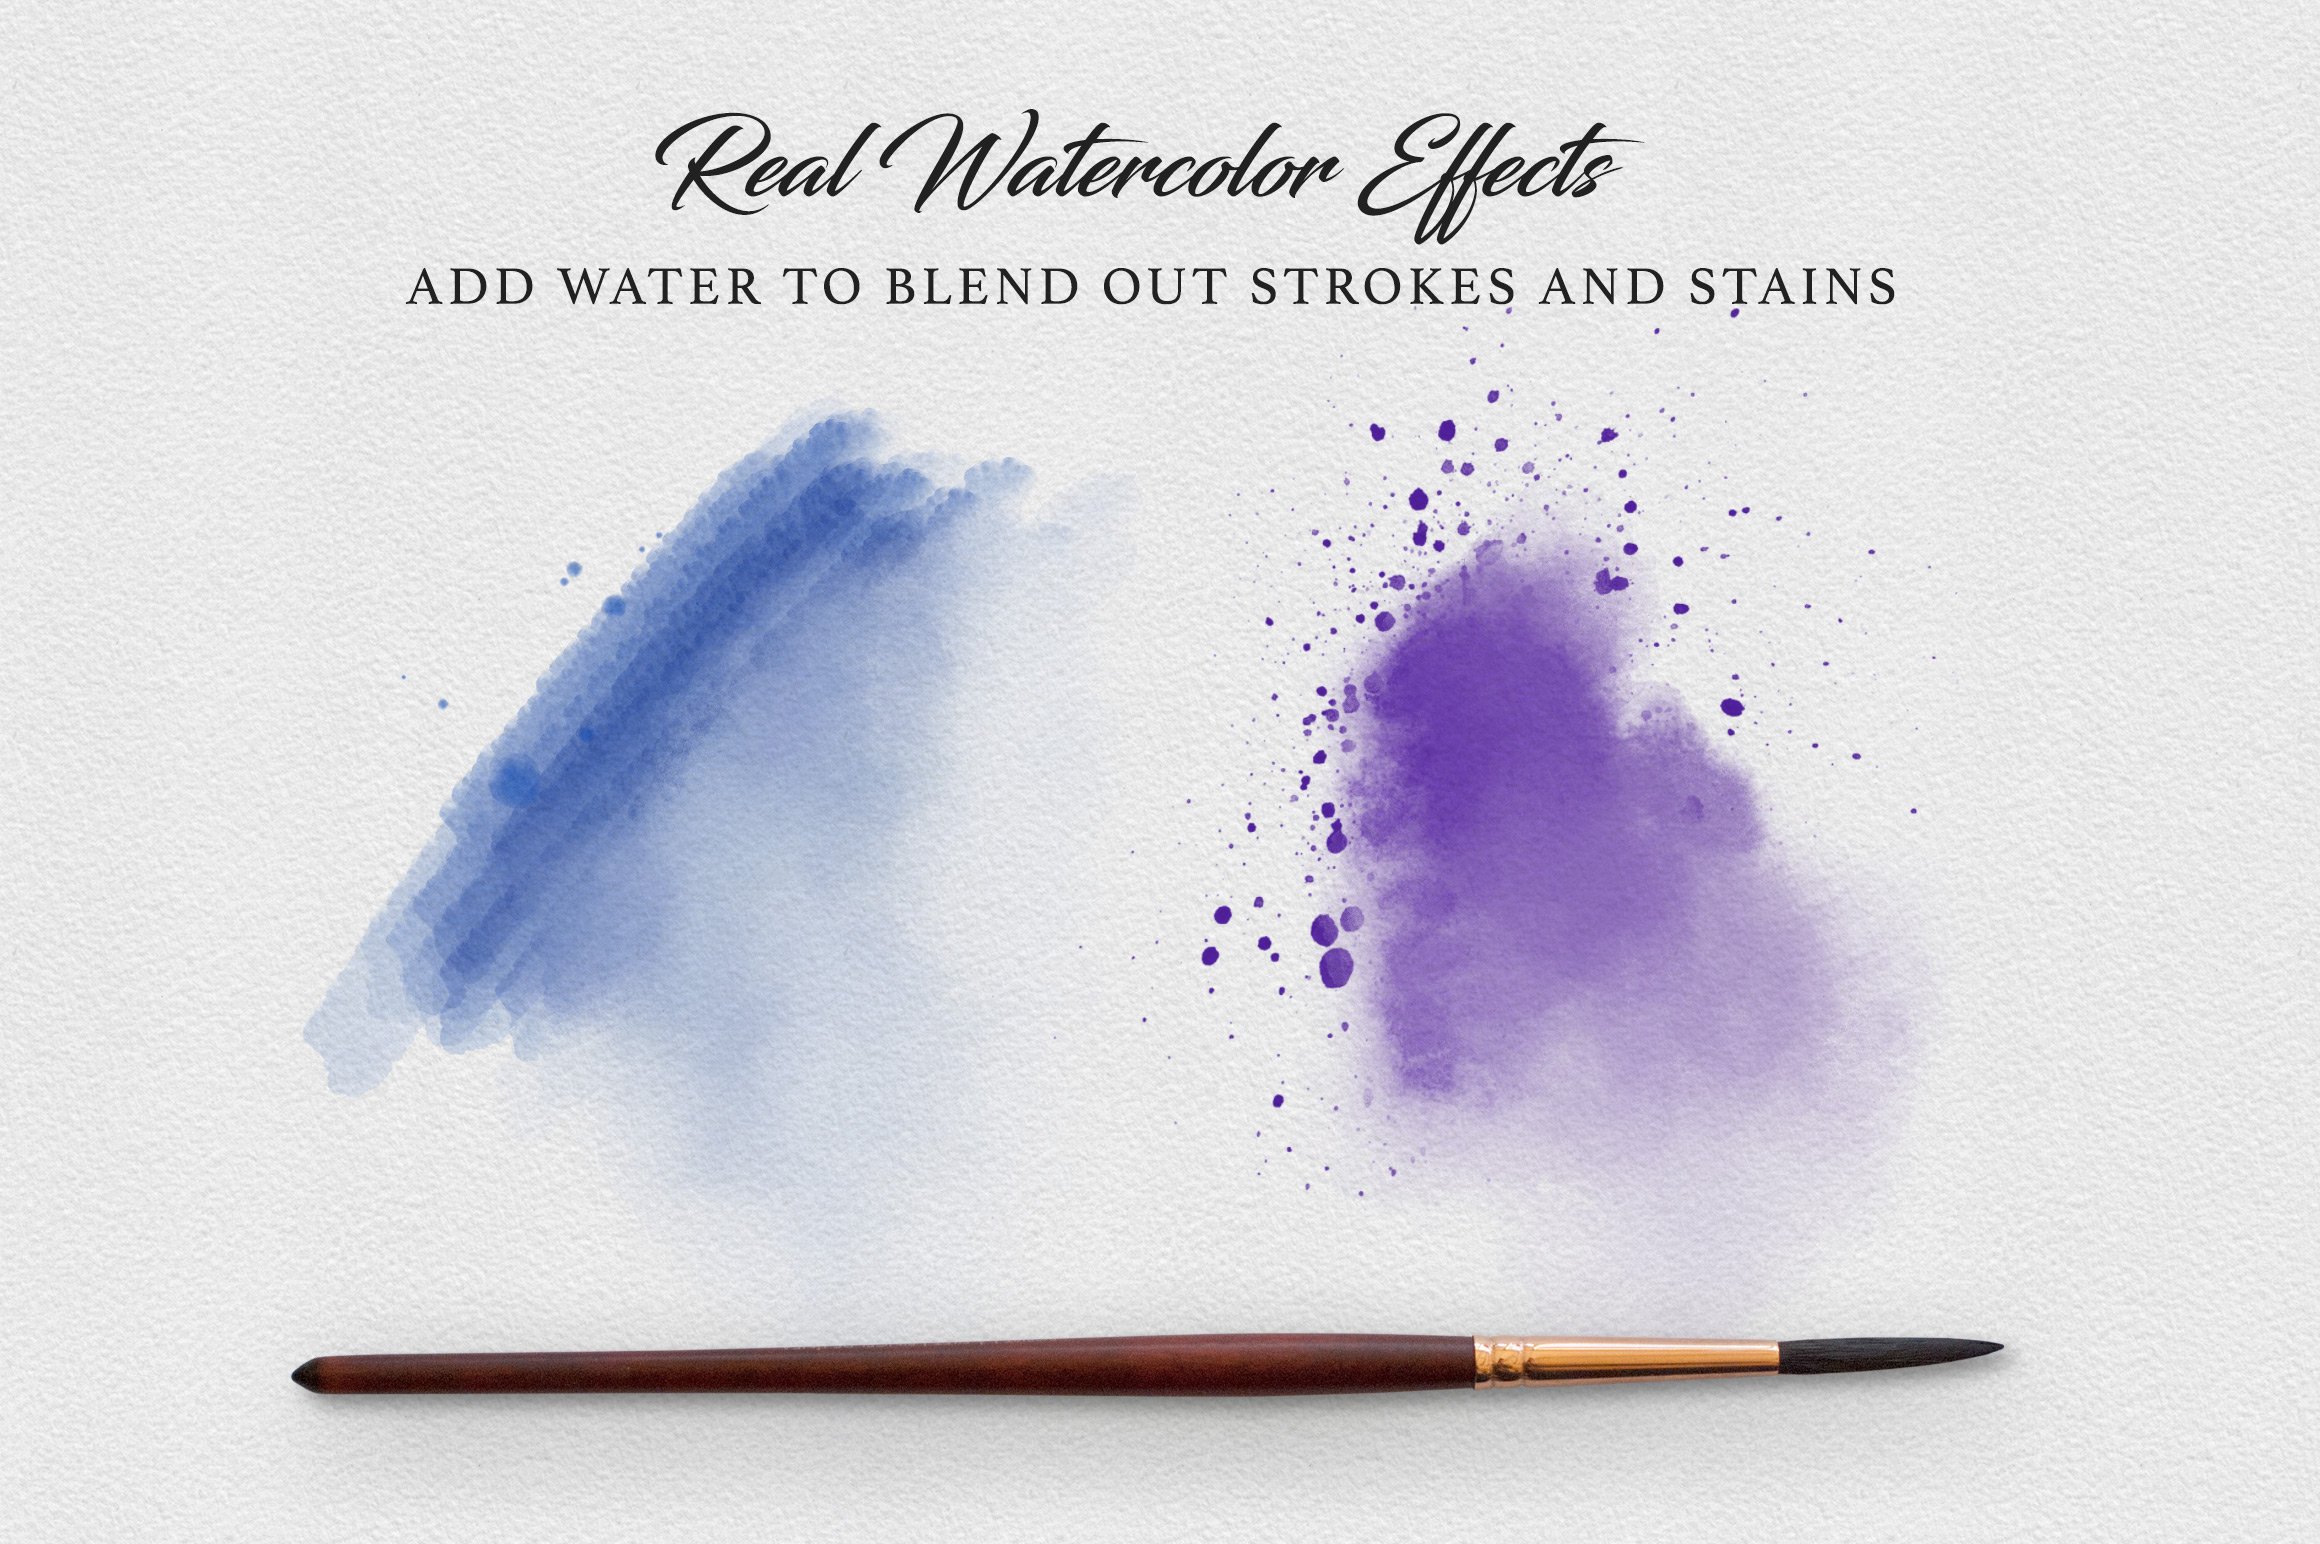 Master Watercolor Procreate Brushes